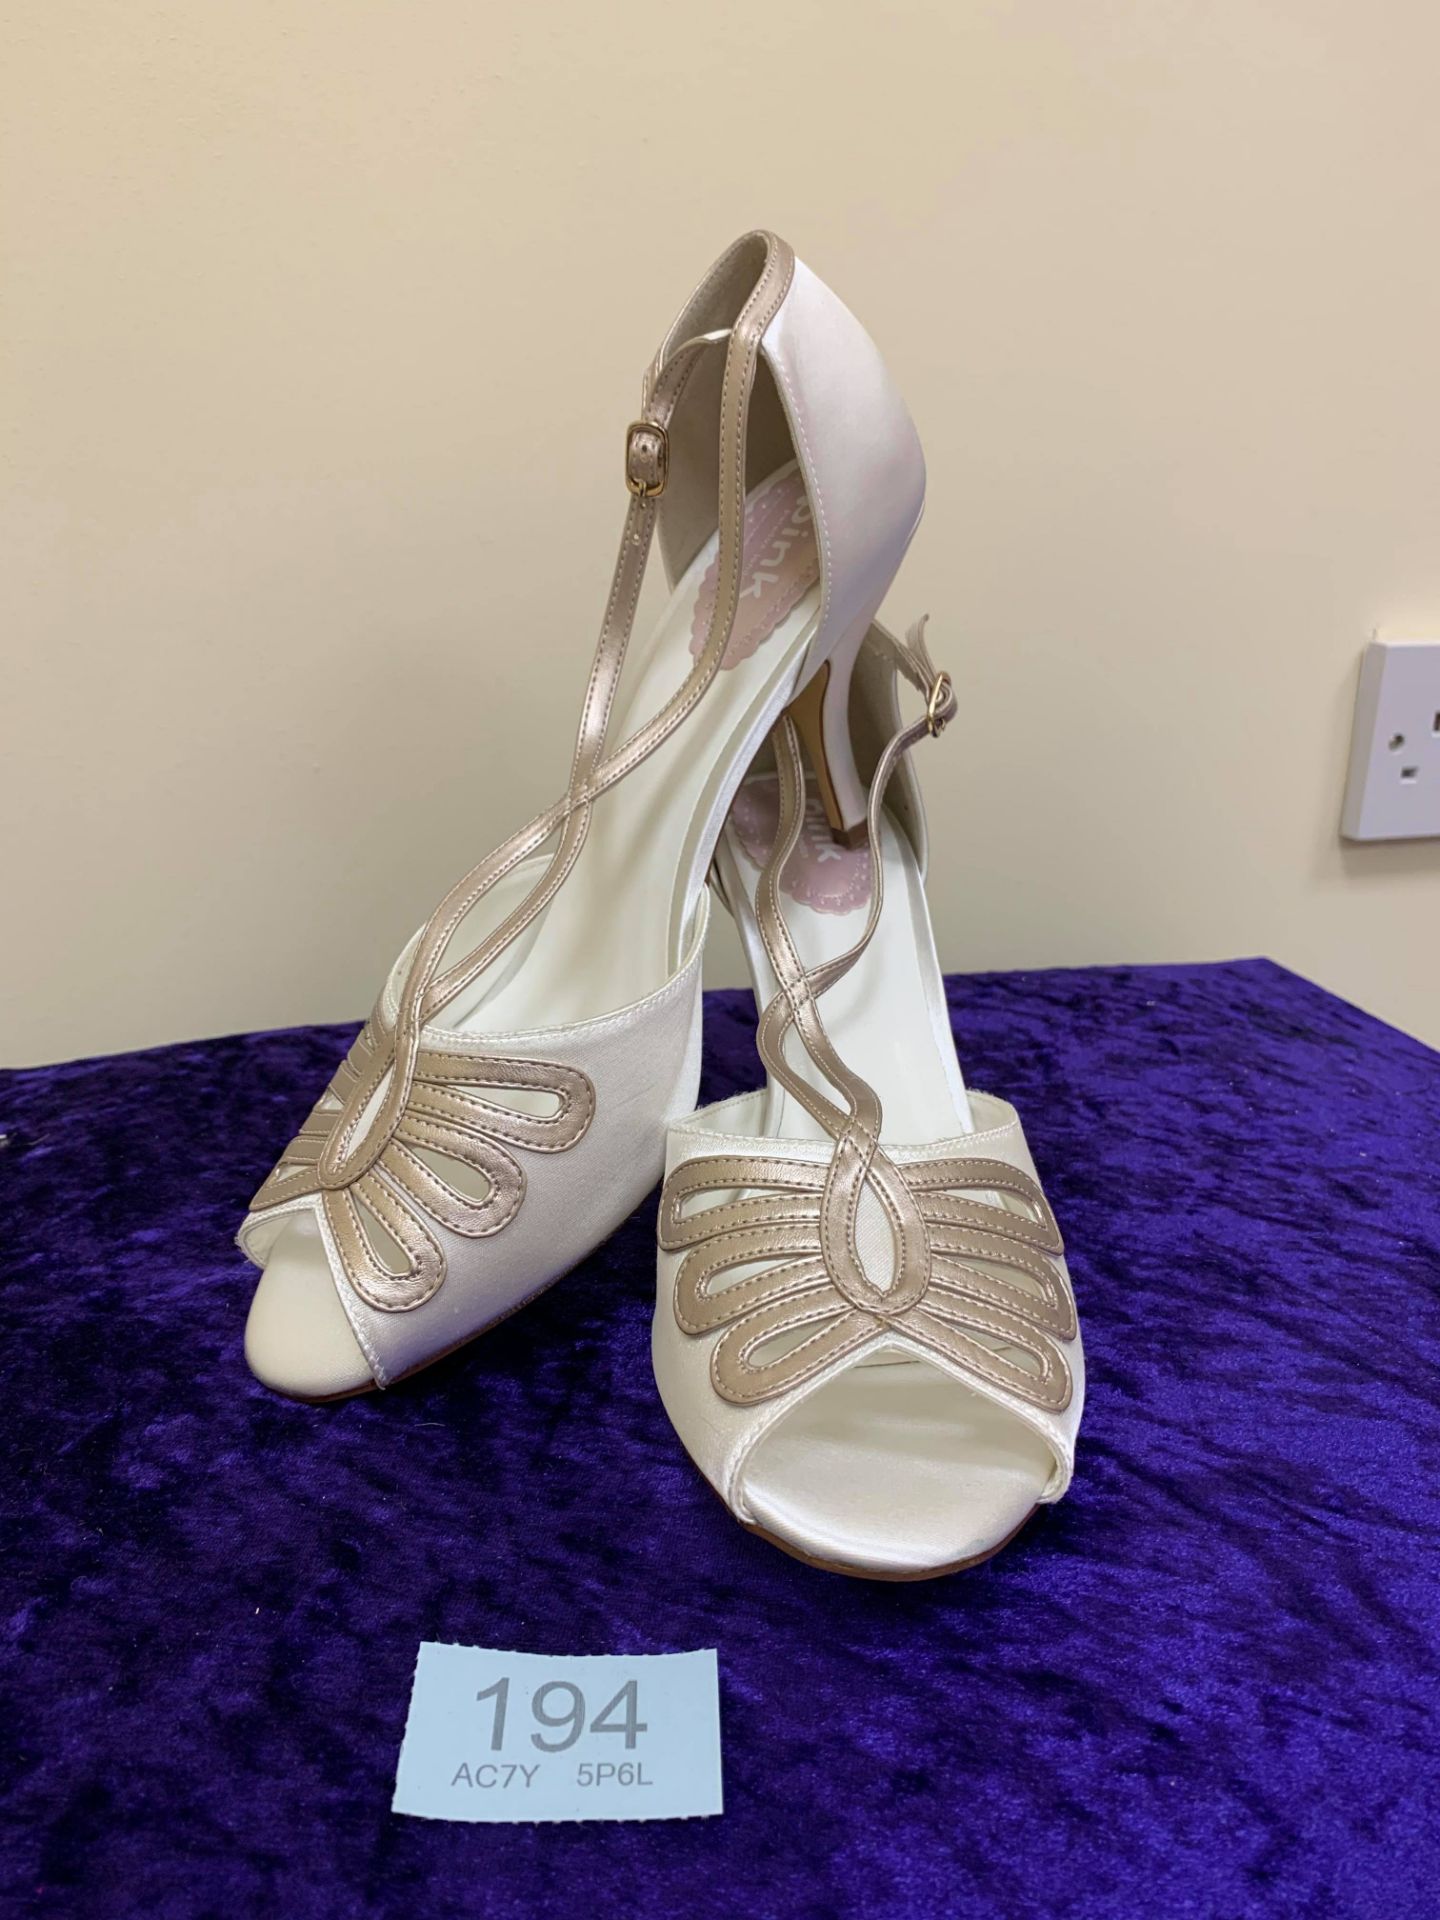 Designer Shoes Ivory/Champagne In Size 42. Code 195